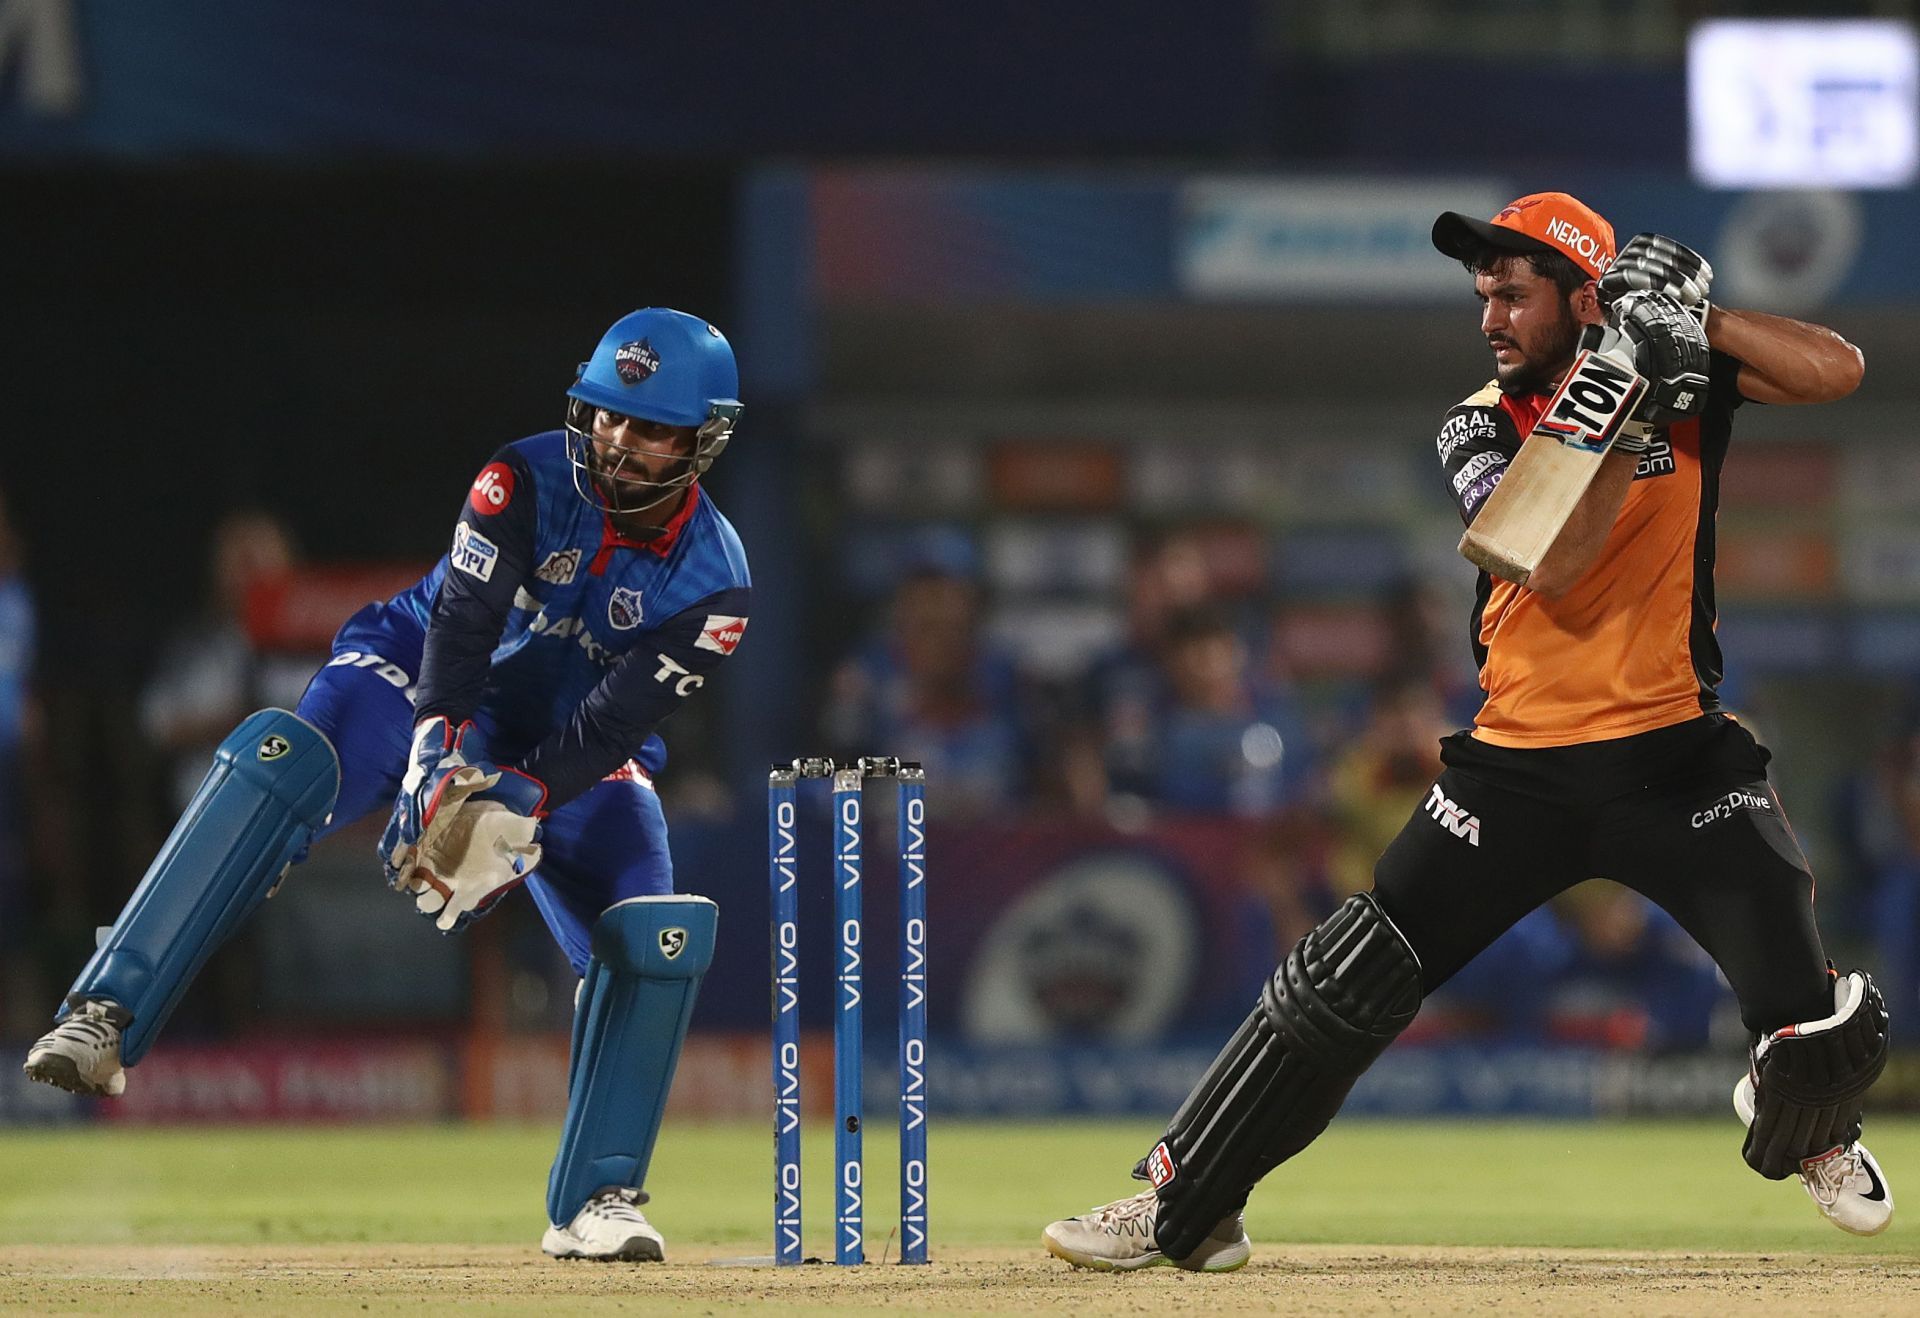 Manish Pandey has been released by Sunrisers Hyderabad before IPL Auction 2022